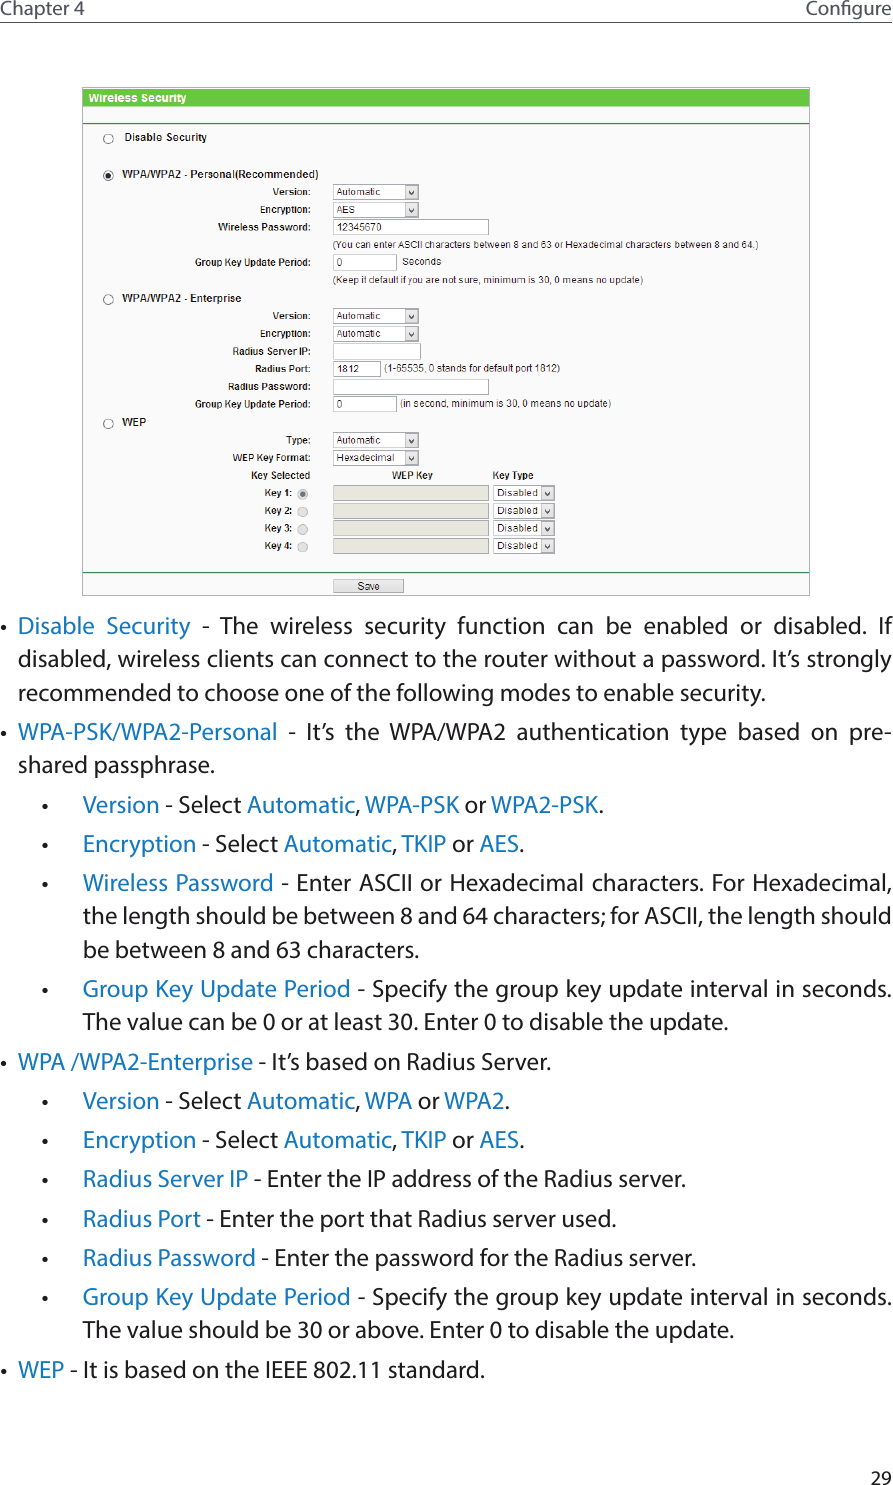 29Chapter 4 Congure•  Disable Security - The wireless security function can be enabled or disabled. If disabled, wireless clients can connect to the router without a password. It’s strongly recommended to choose one of the following modes to enable security.•  WPA-PSK/WPA2-Personal - It’s the WPA/WPA2 authentication type based on pre-shared passphrase. •  Version - Select Automatic, WPA-PSK or WPA2-PSK.•  Encryption - Select Automatic, TKIP or AES.•  Wireless Password - Enter ASCII or Hexadecimal characters. For Hexadecimal, the length should be between 8 and 64 characters; for ASCII, the length should be between 8 and 63 characters.•  Group Key Update Period - Specify the group key update interval in seconds. The value can be 0 or at least 30. Enter 0 to disable the update.•  WPA /WPA2-Enterprise - It’s based on Radius Server.•  Version - Select Automatic, WPA or WPA2.•  Encryption - Select Automatic, TKIP or AES.•  Radius Server IP - Enter the IP address of the Radius server.•  Radius Port - Enter the port that Radius server used.•  Radius Password - Enter the password for the Radius server.•  Group Key Update Period - Specify the group key update interval in seconds. The value should be 30 or above. Enter 0 to disable the update.•  WEP - It is based on the IEEE 802.11 standard. 